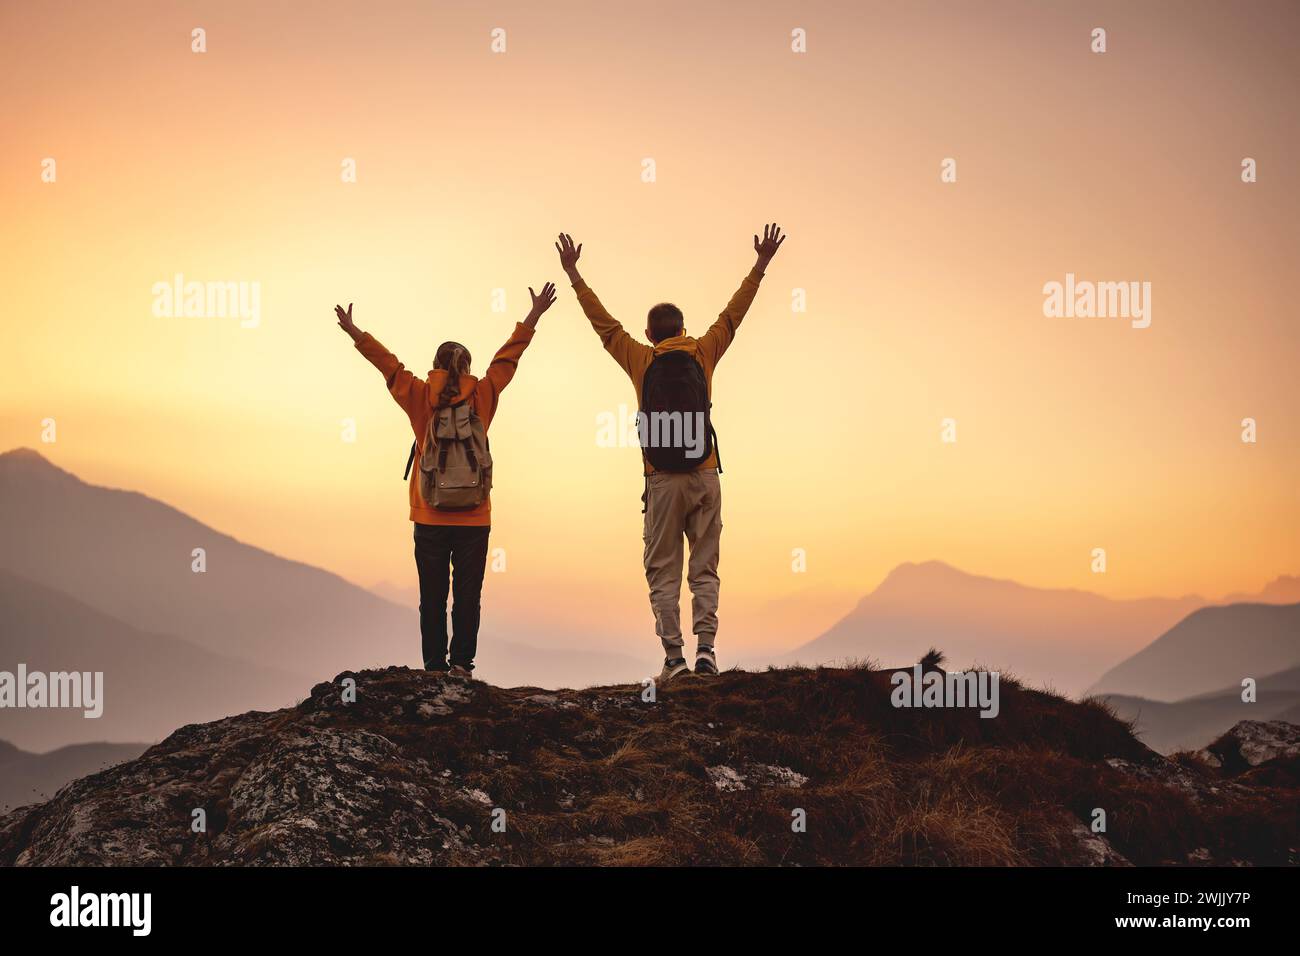 Two hikers are standing in winner pose at mountain top Stock Photo